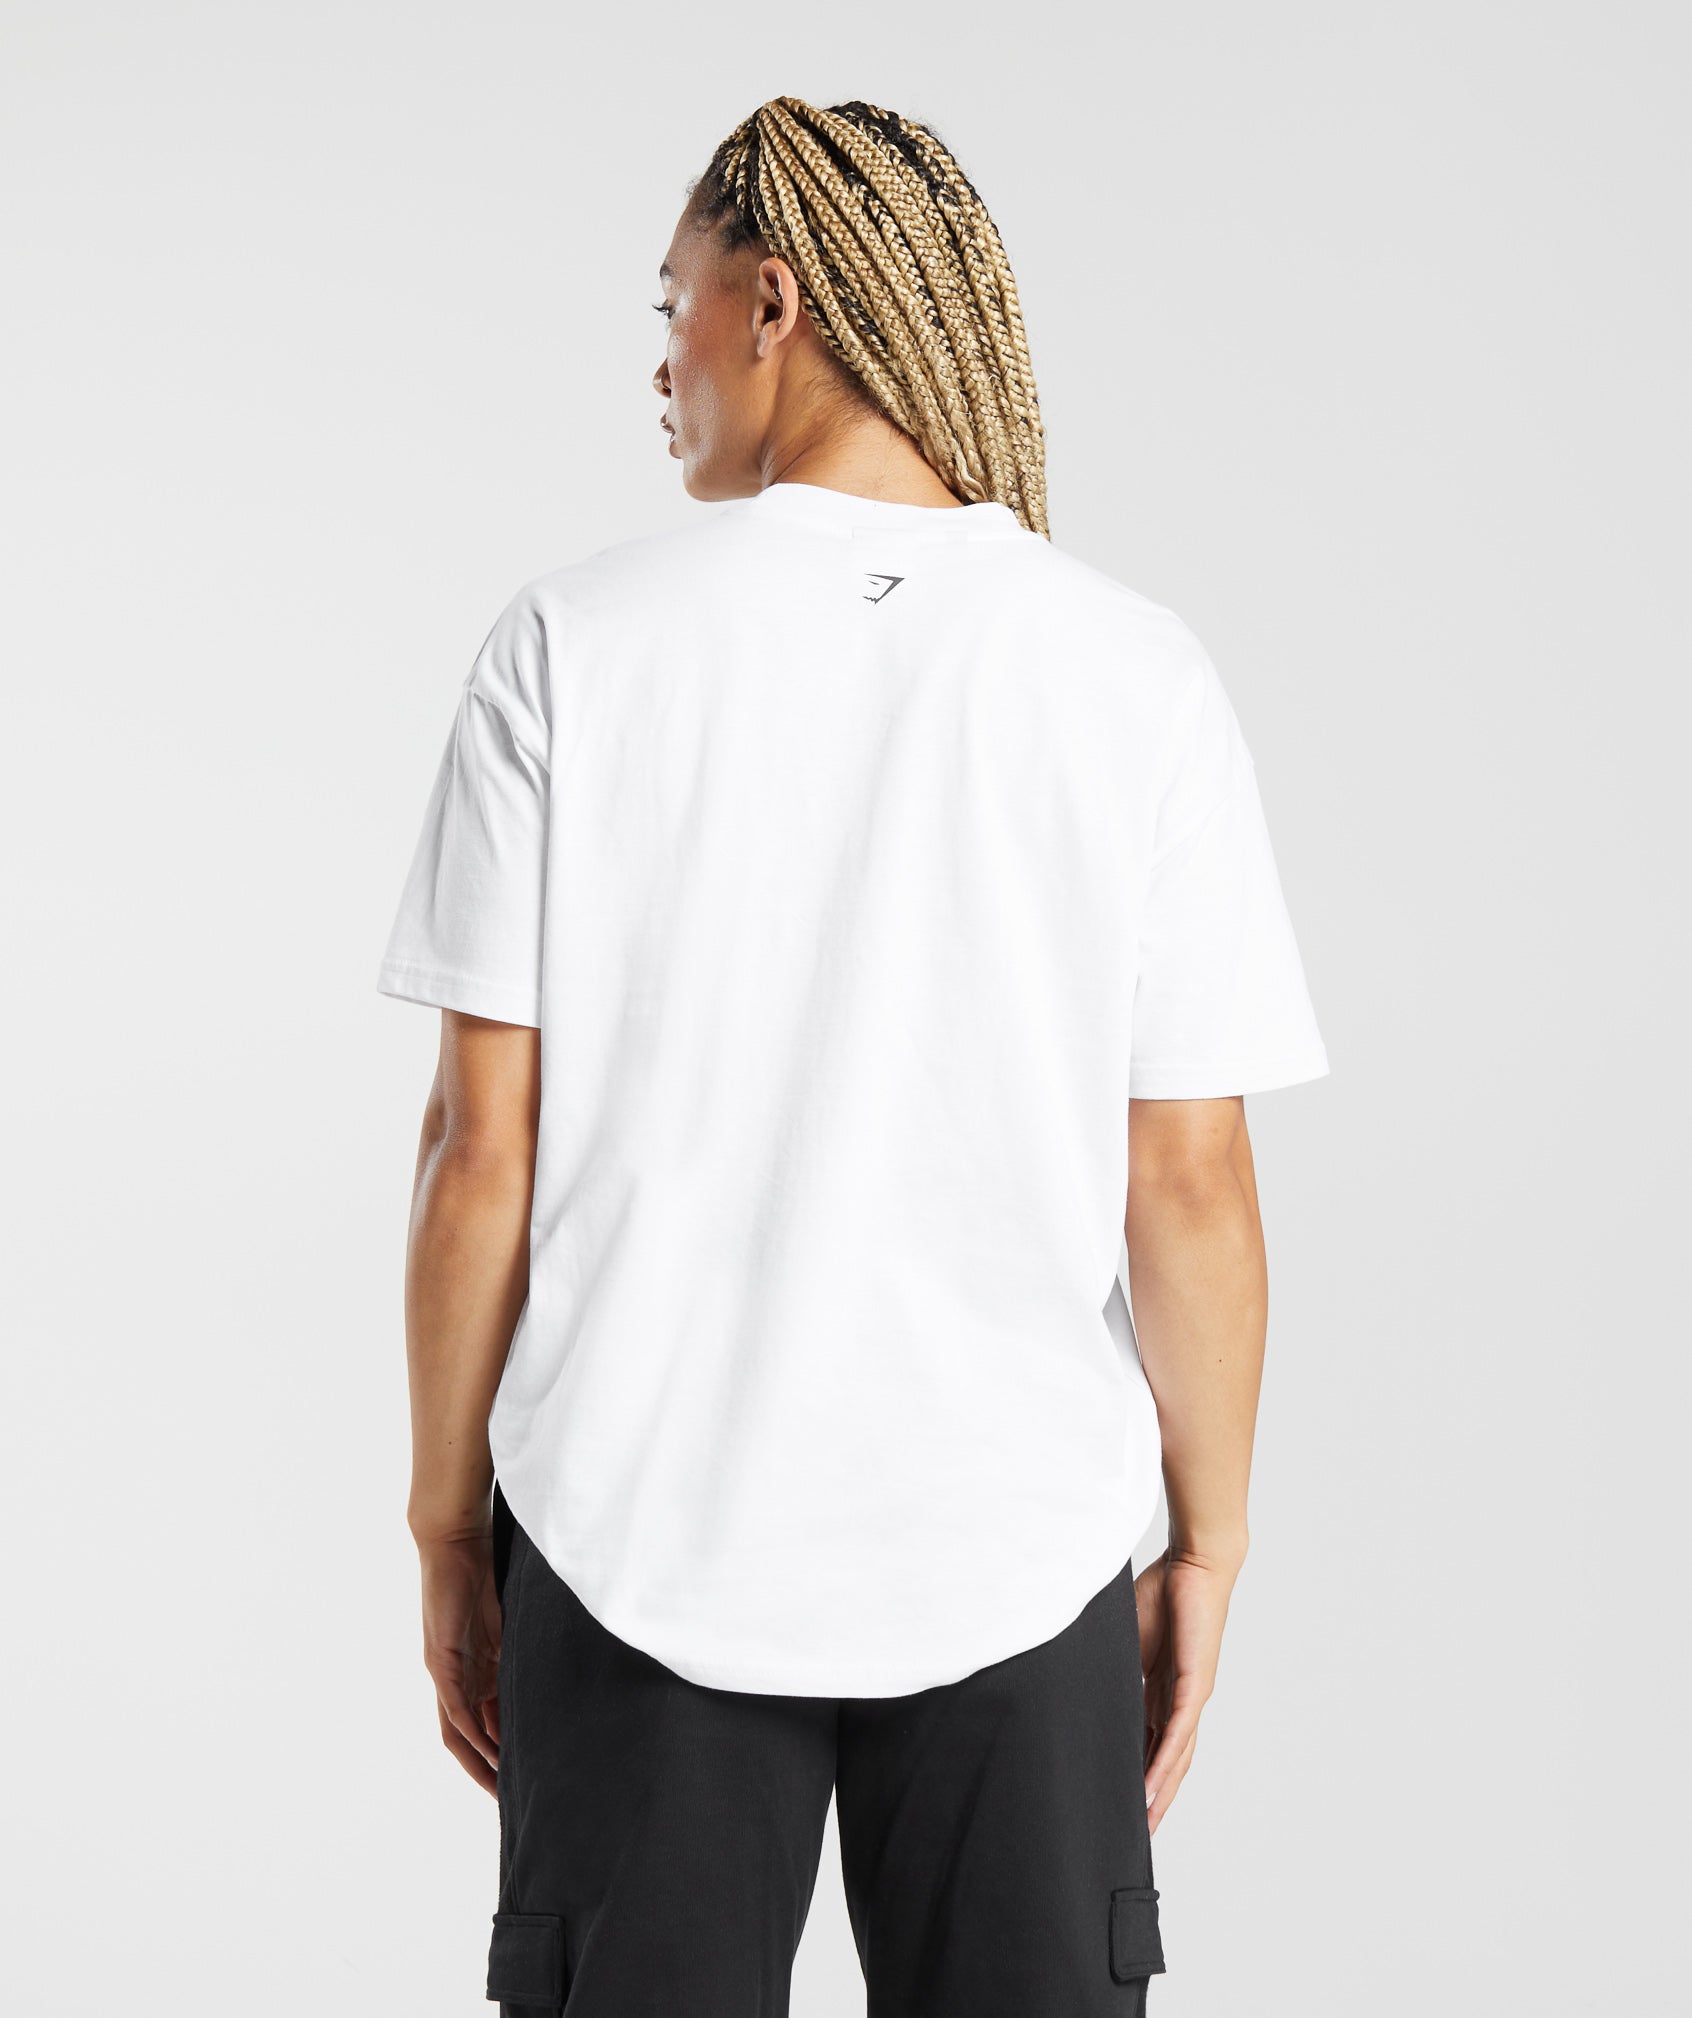 Lifting Apparel Oversized T-Shirt in White - view 2